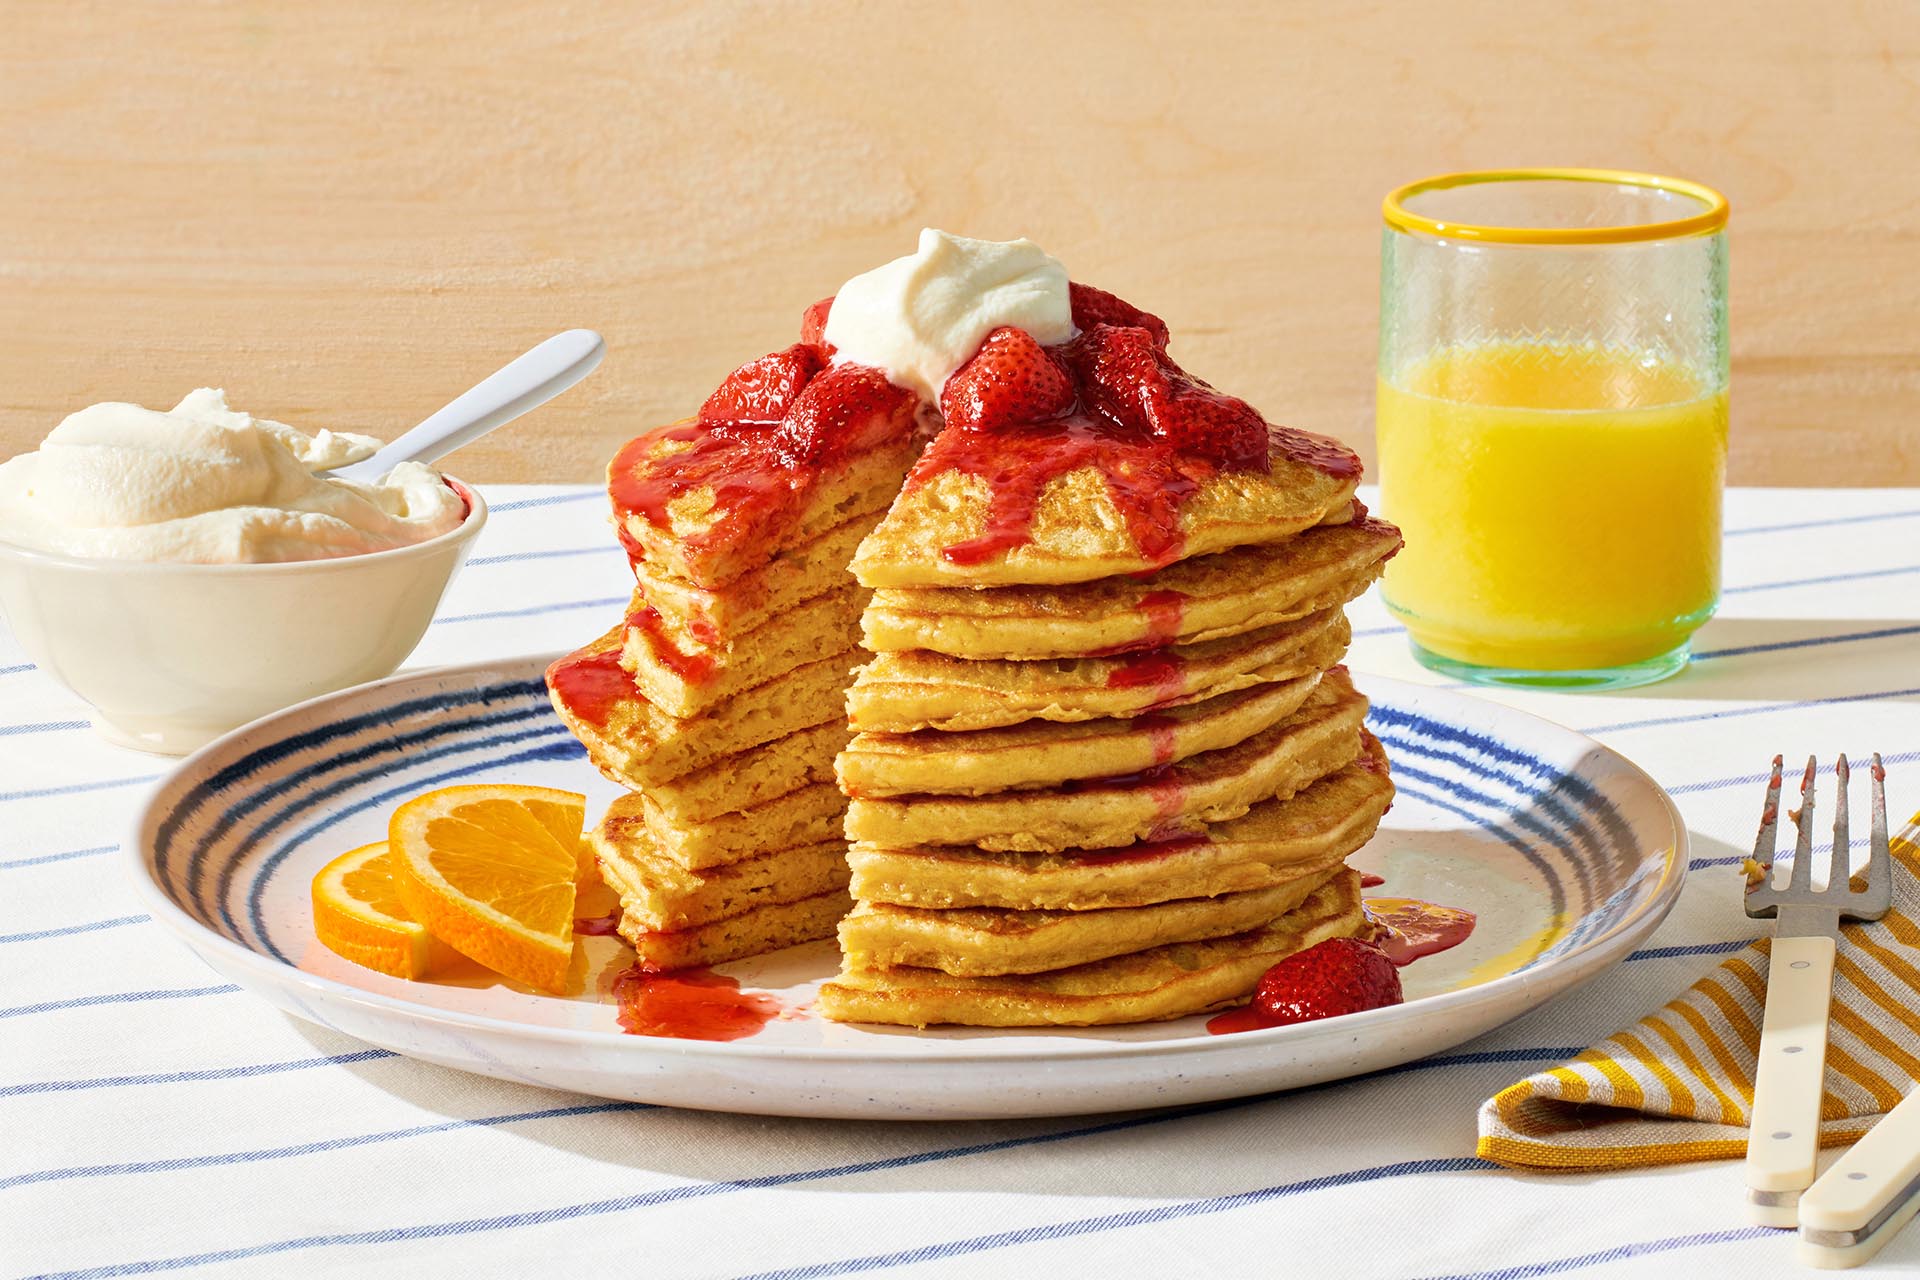 A tall stack of chickpea pancakes topped with strawberries and whipped cream